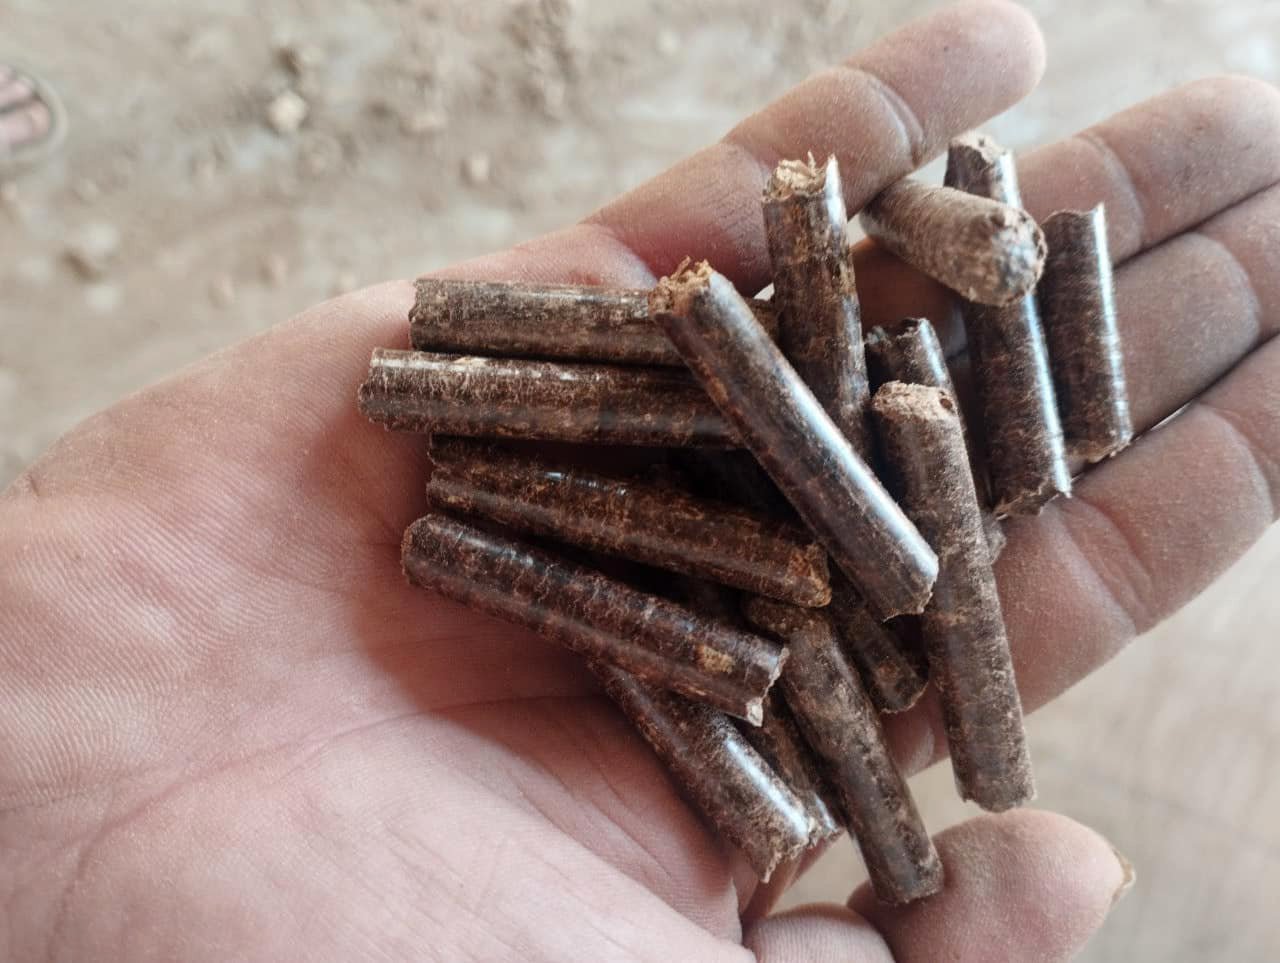 Wood pellets produced at a factory in Binh Duong province. Photo: Son Trang.